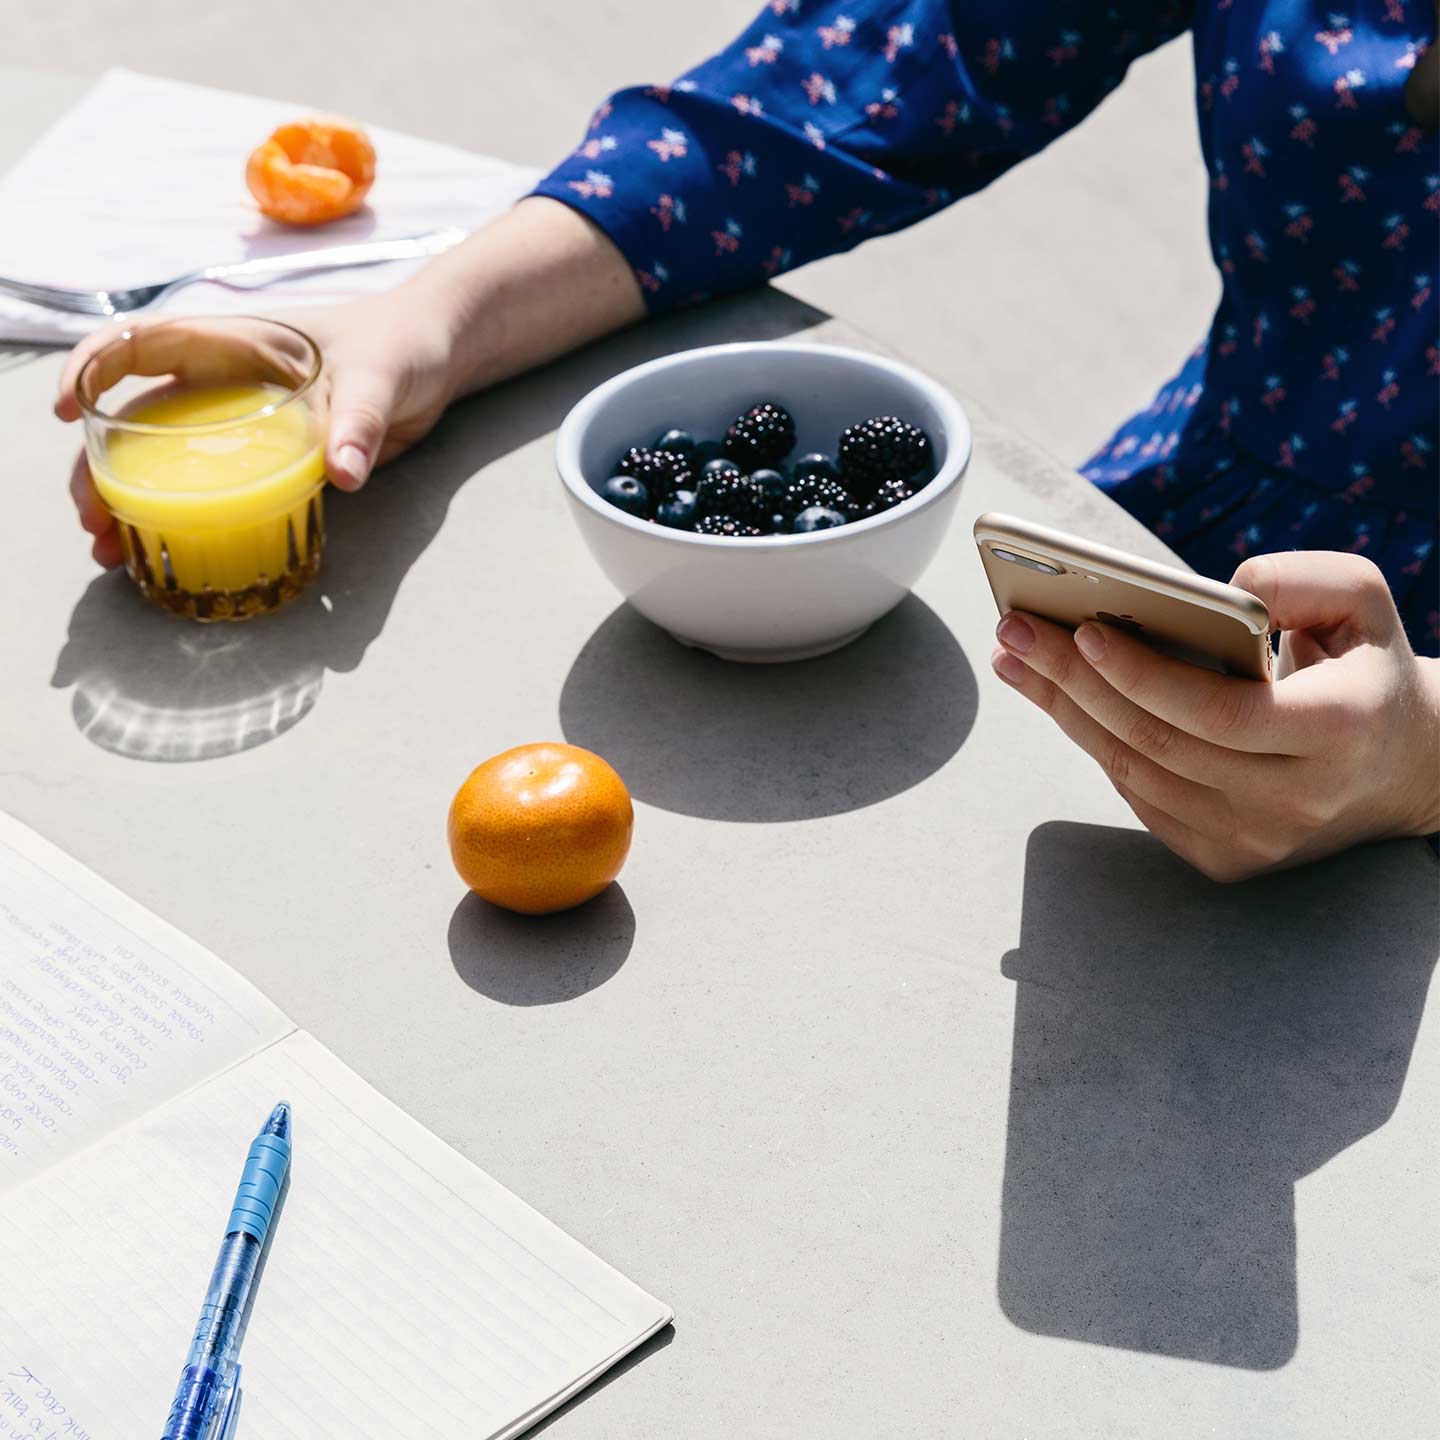 Person holding a phone and a glass of orange juice in front of a bowl of berries